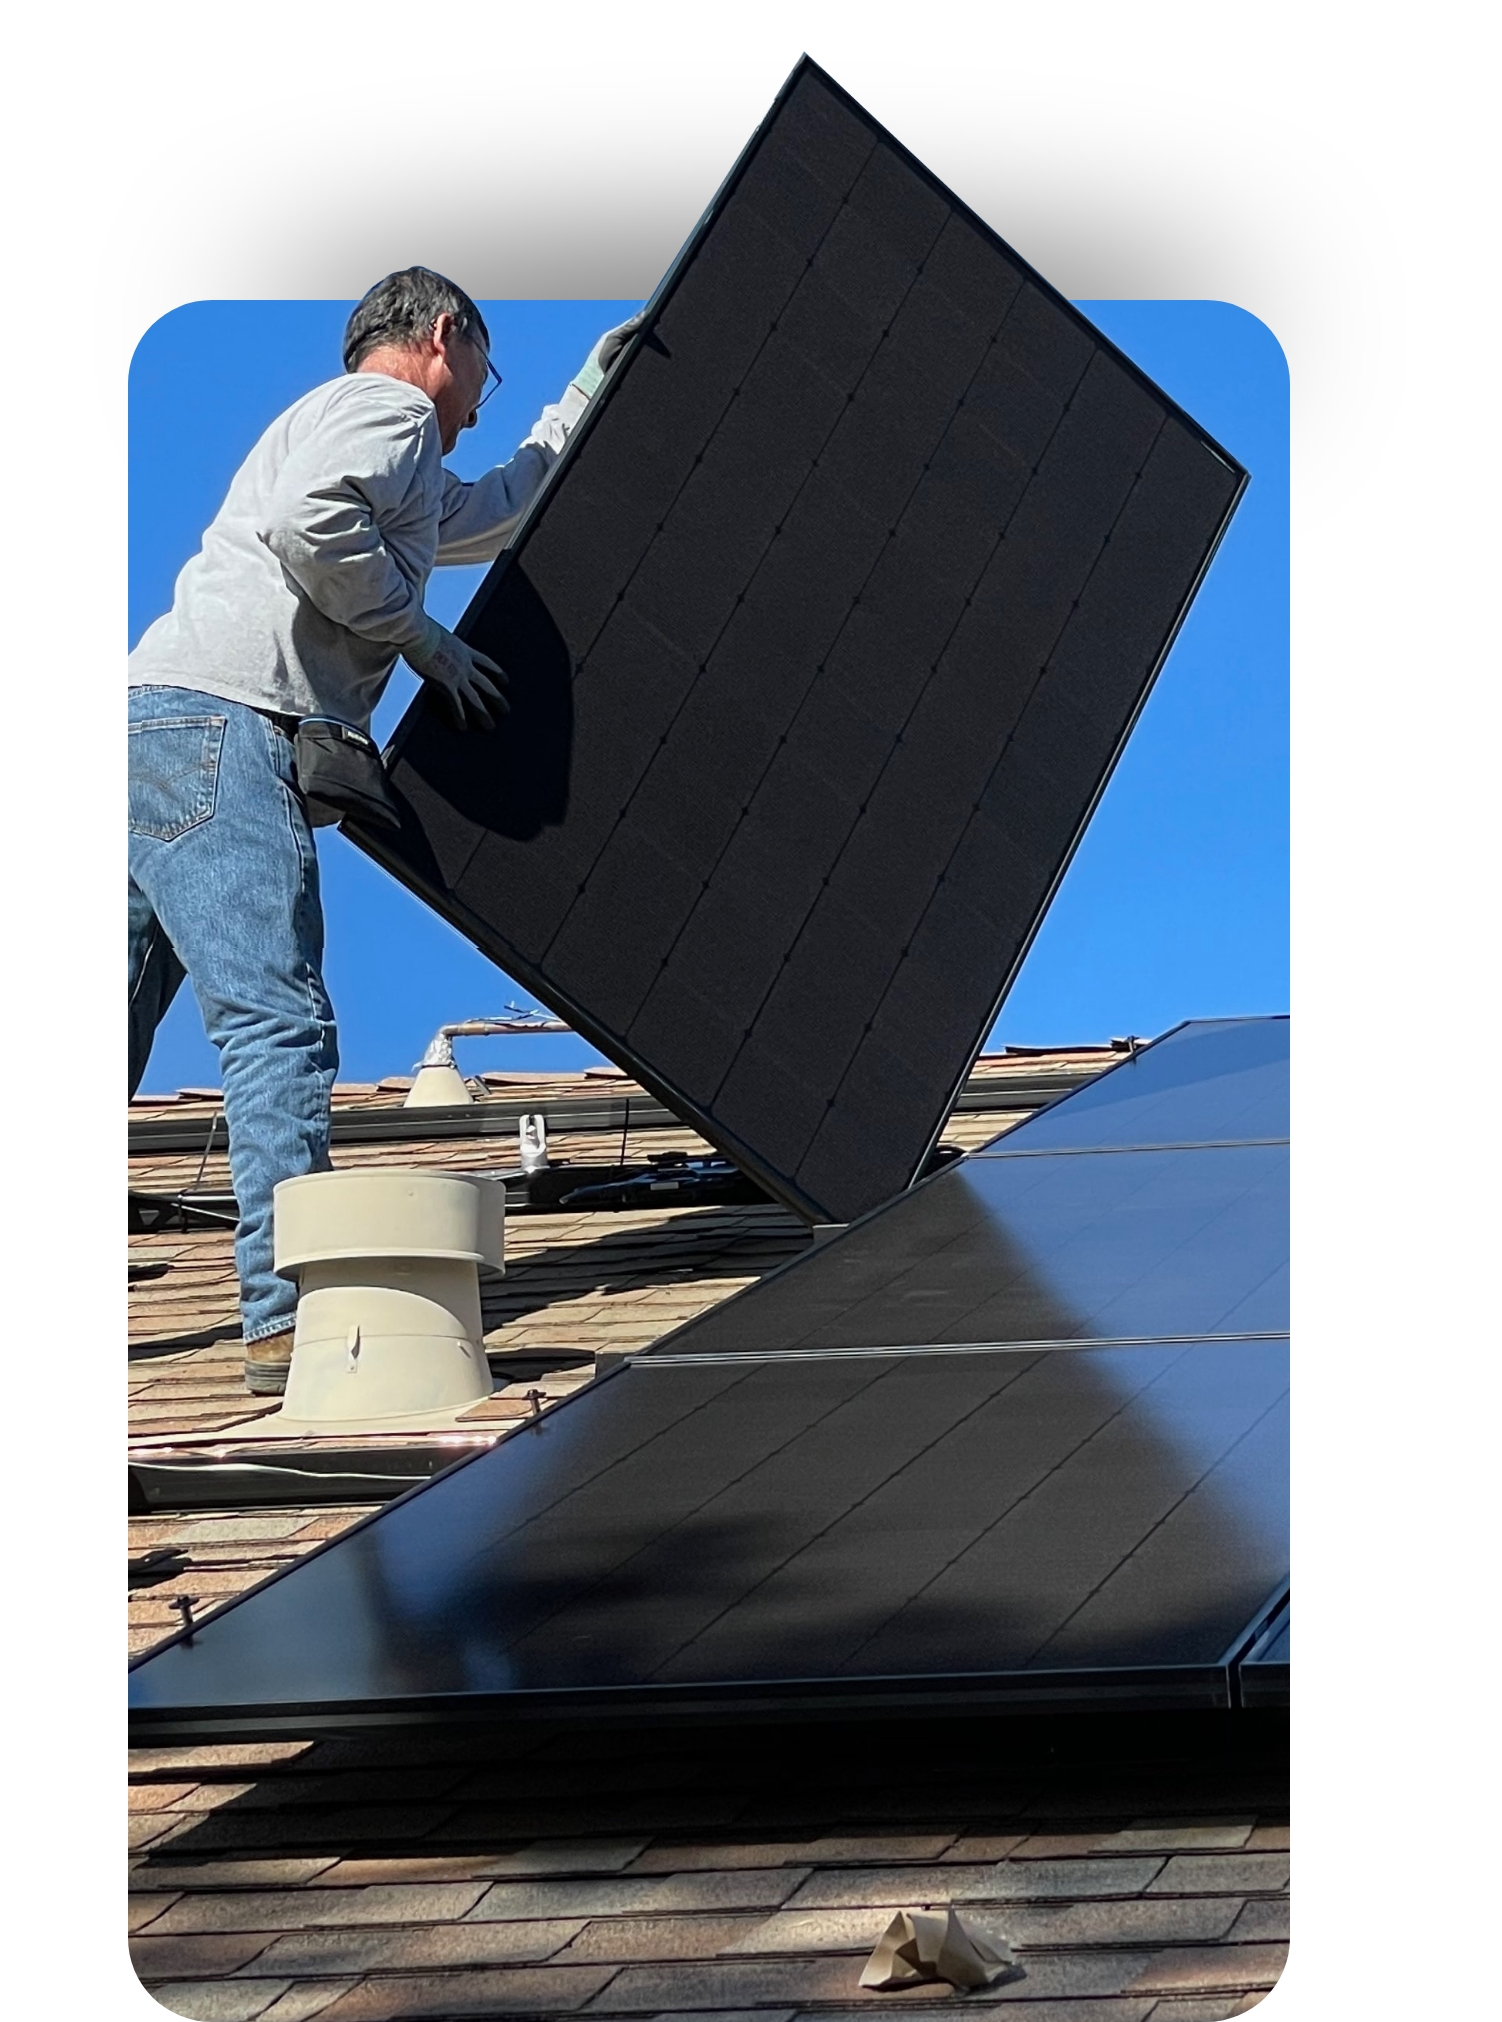 Solar by Peak to Peak is the best of Aurora solar panel companies for solar system installation, solar batteries, solar incentives, and solar equipment in Aurora and Denver, CO.